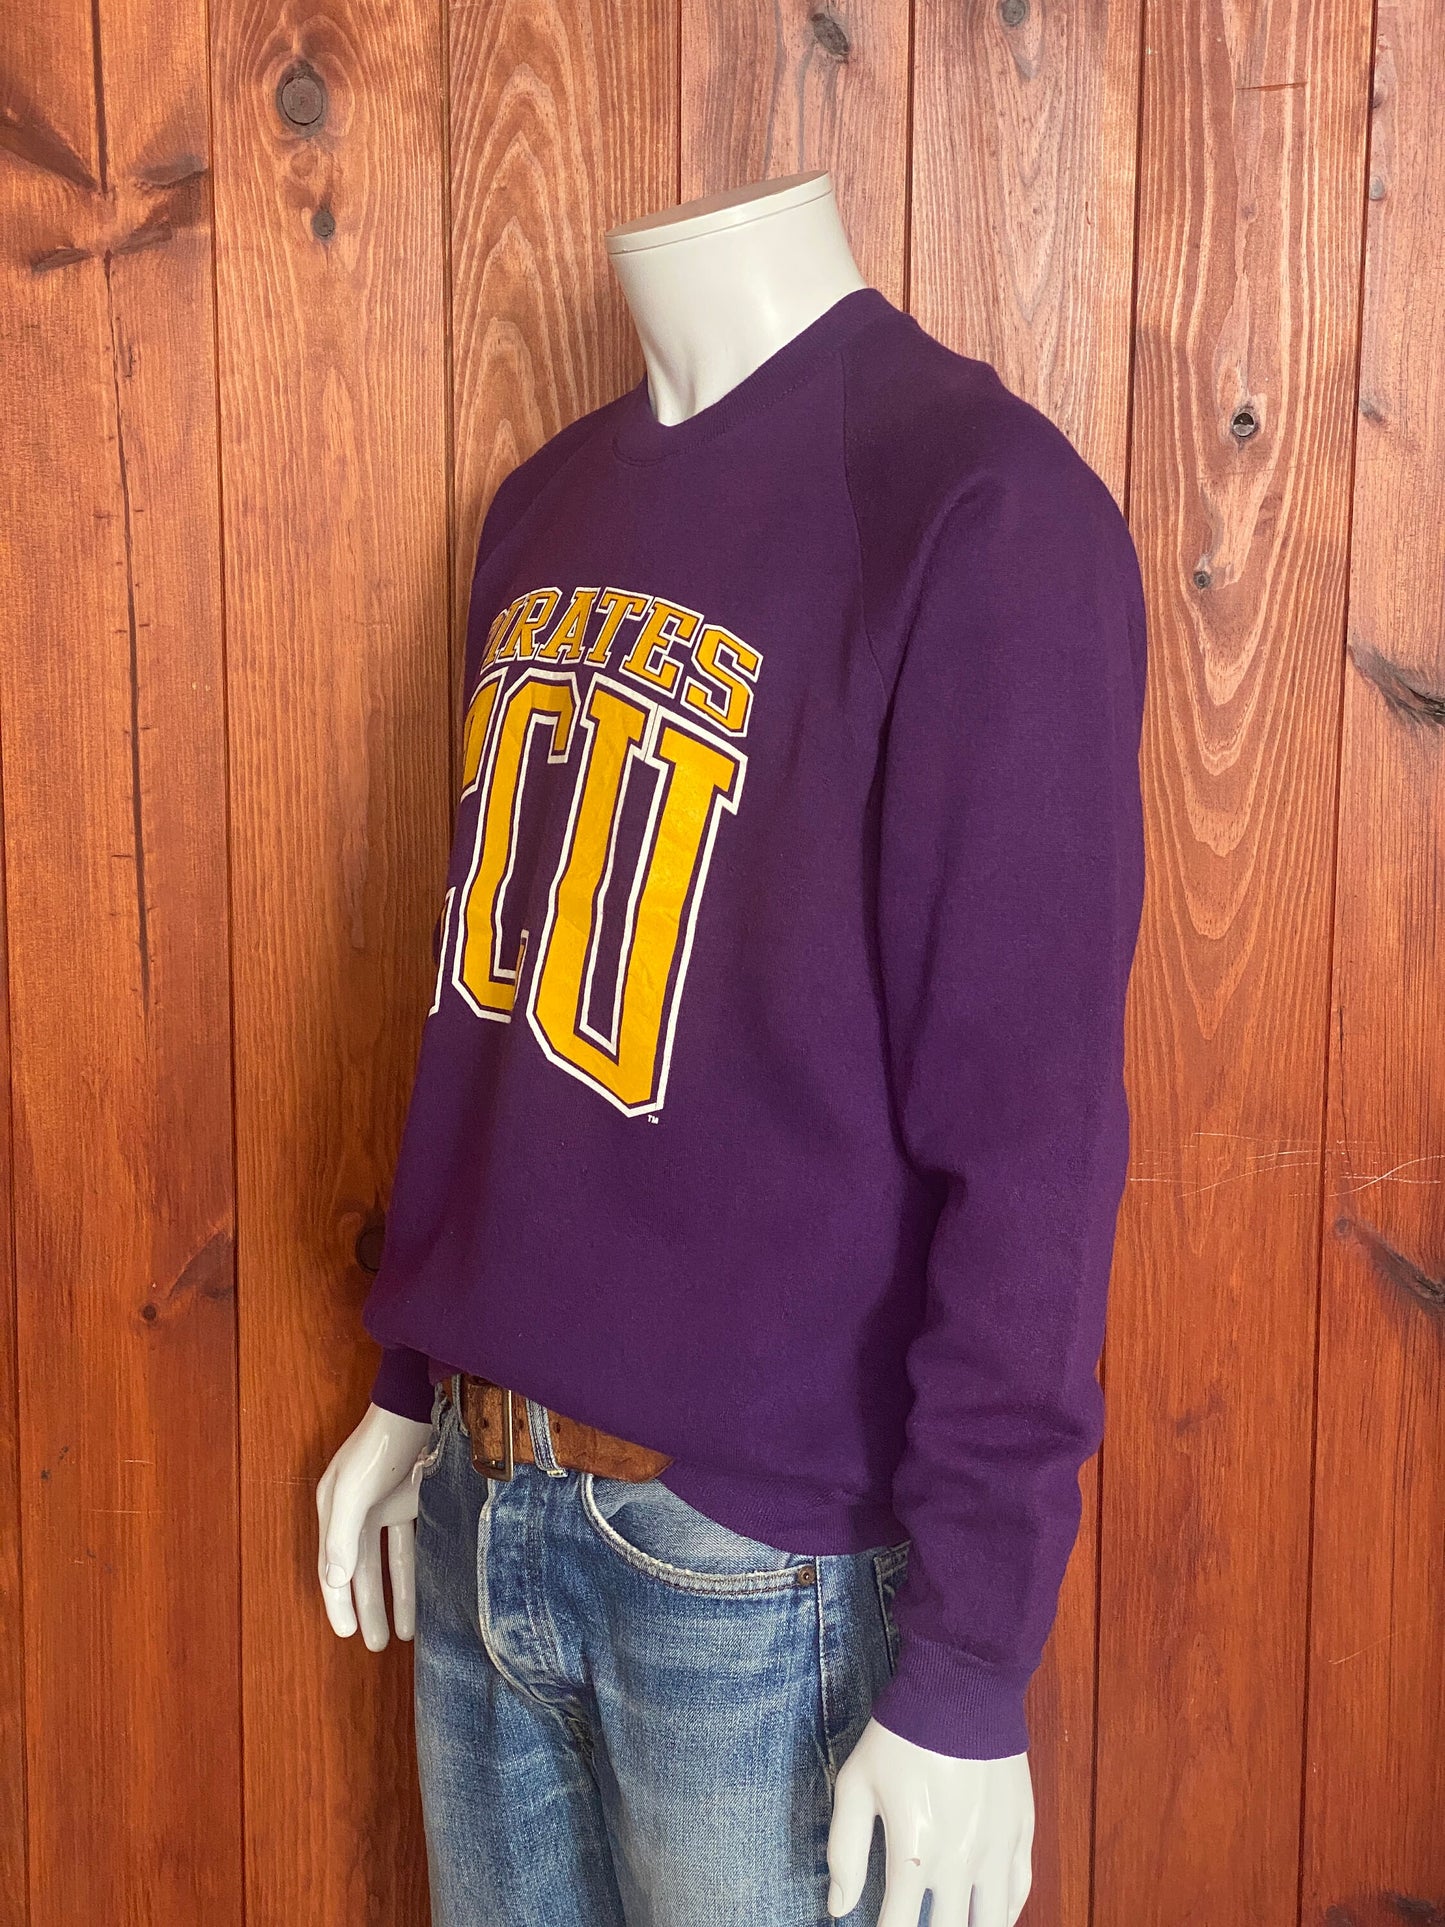 Size XL. Made In USA Vintage 80s Pirates ECU sweatshirt  made by Jerzees